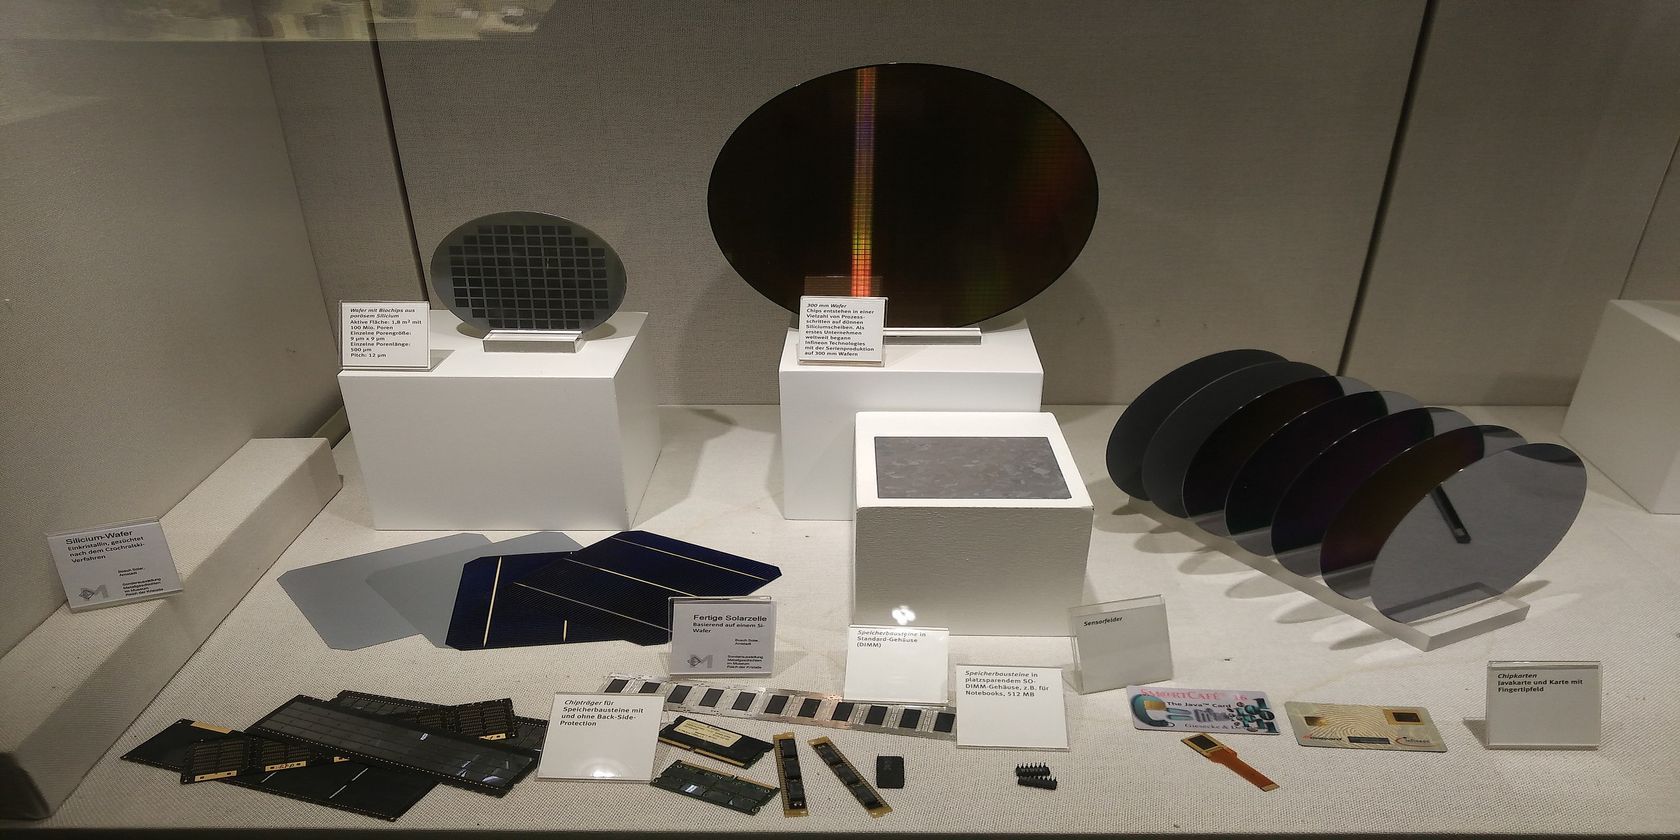 Silicon wafers on stands